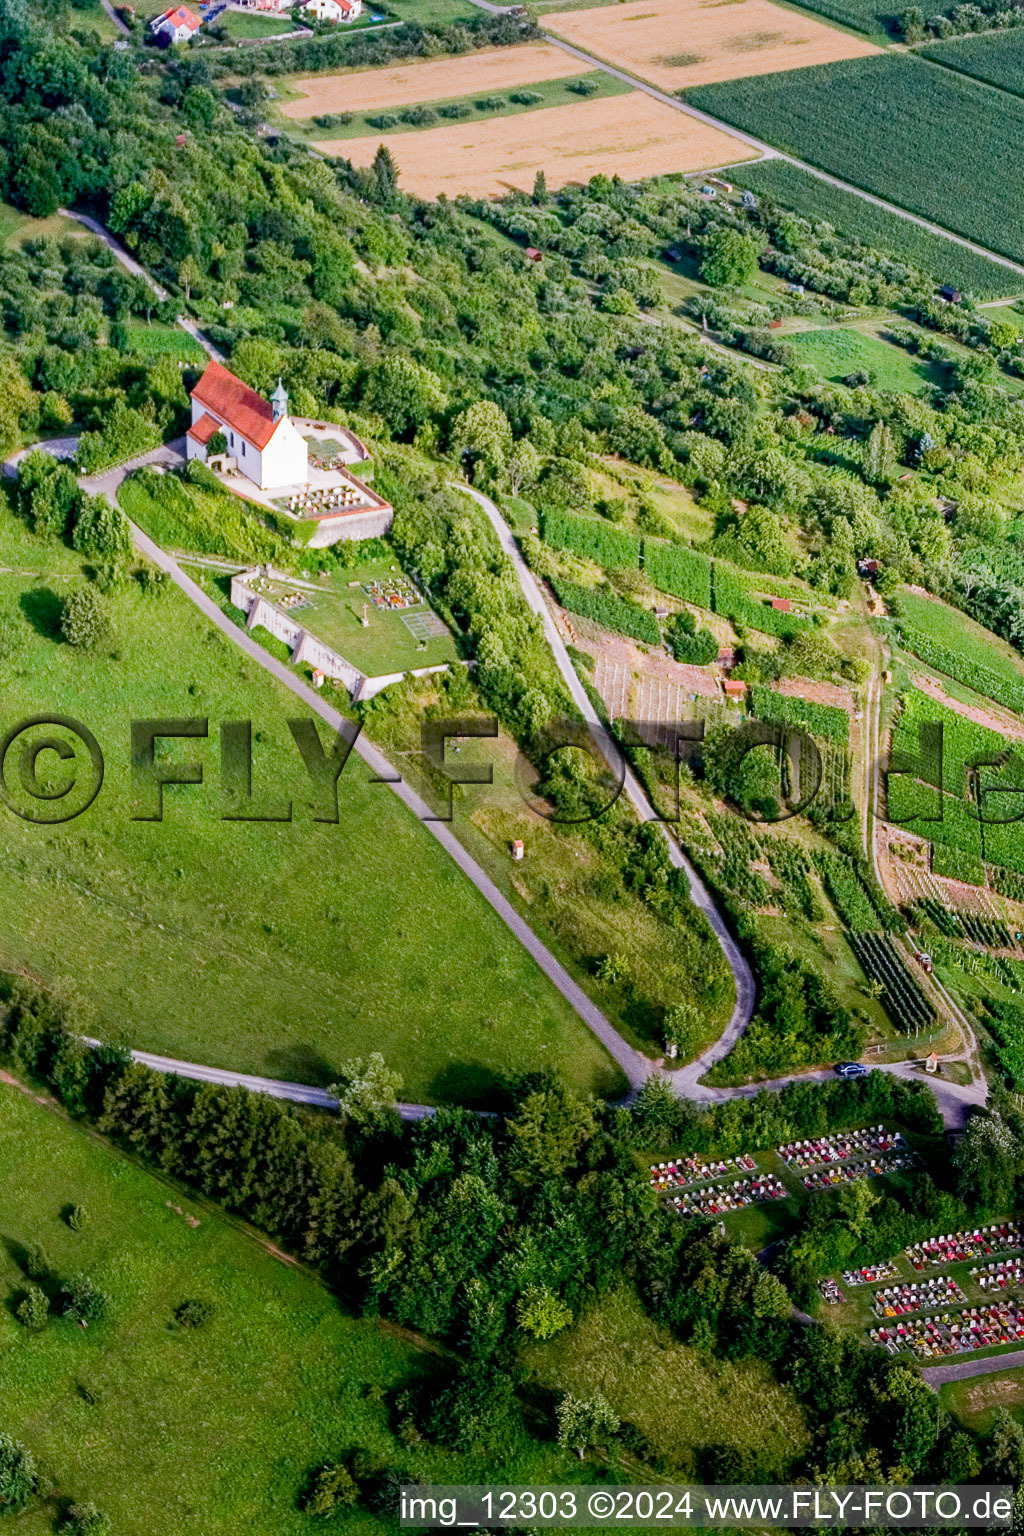 Aerial view of Churches building the chapel Wurmlinger Kapelle - St. Remigius Kapelle in Tuebingen in the state Baden-Wurttemberg, Germany